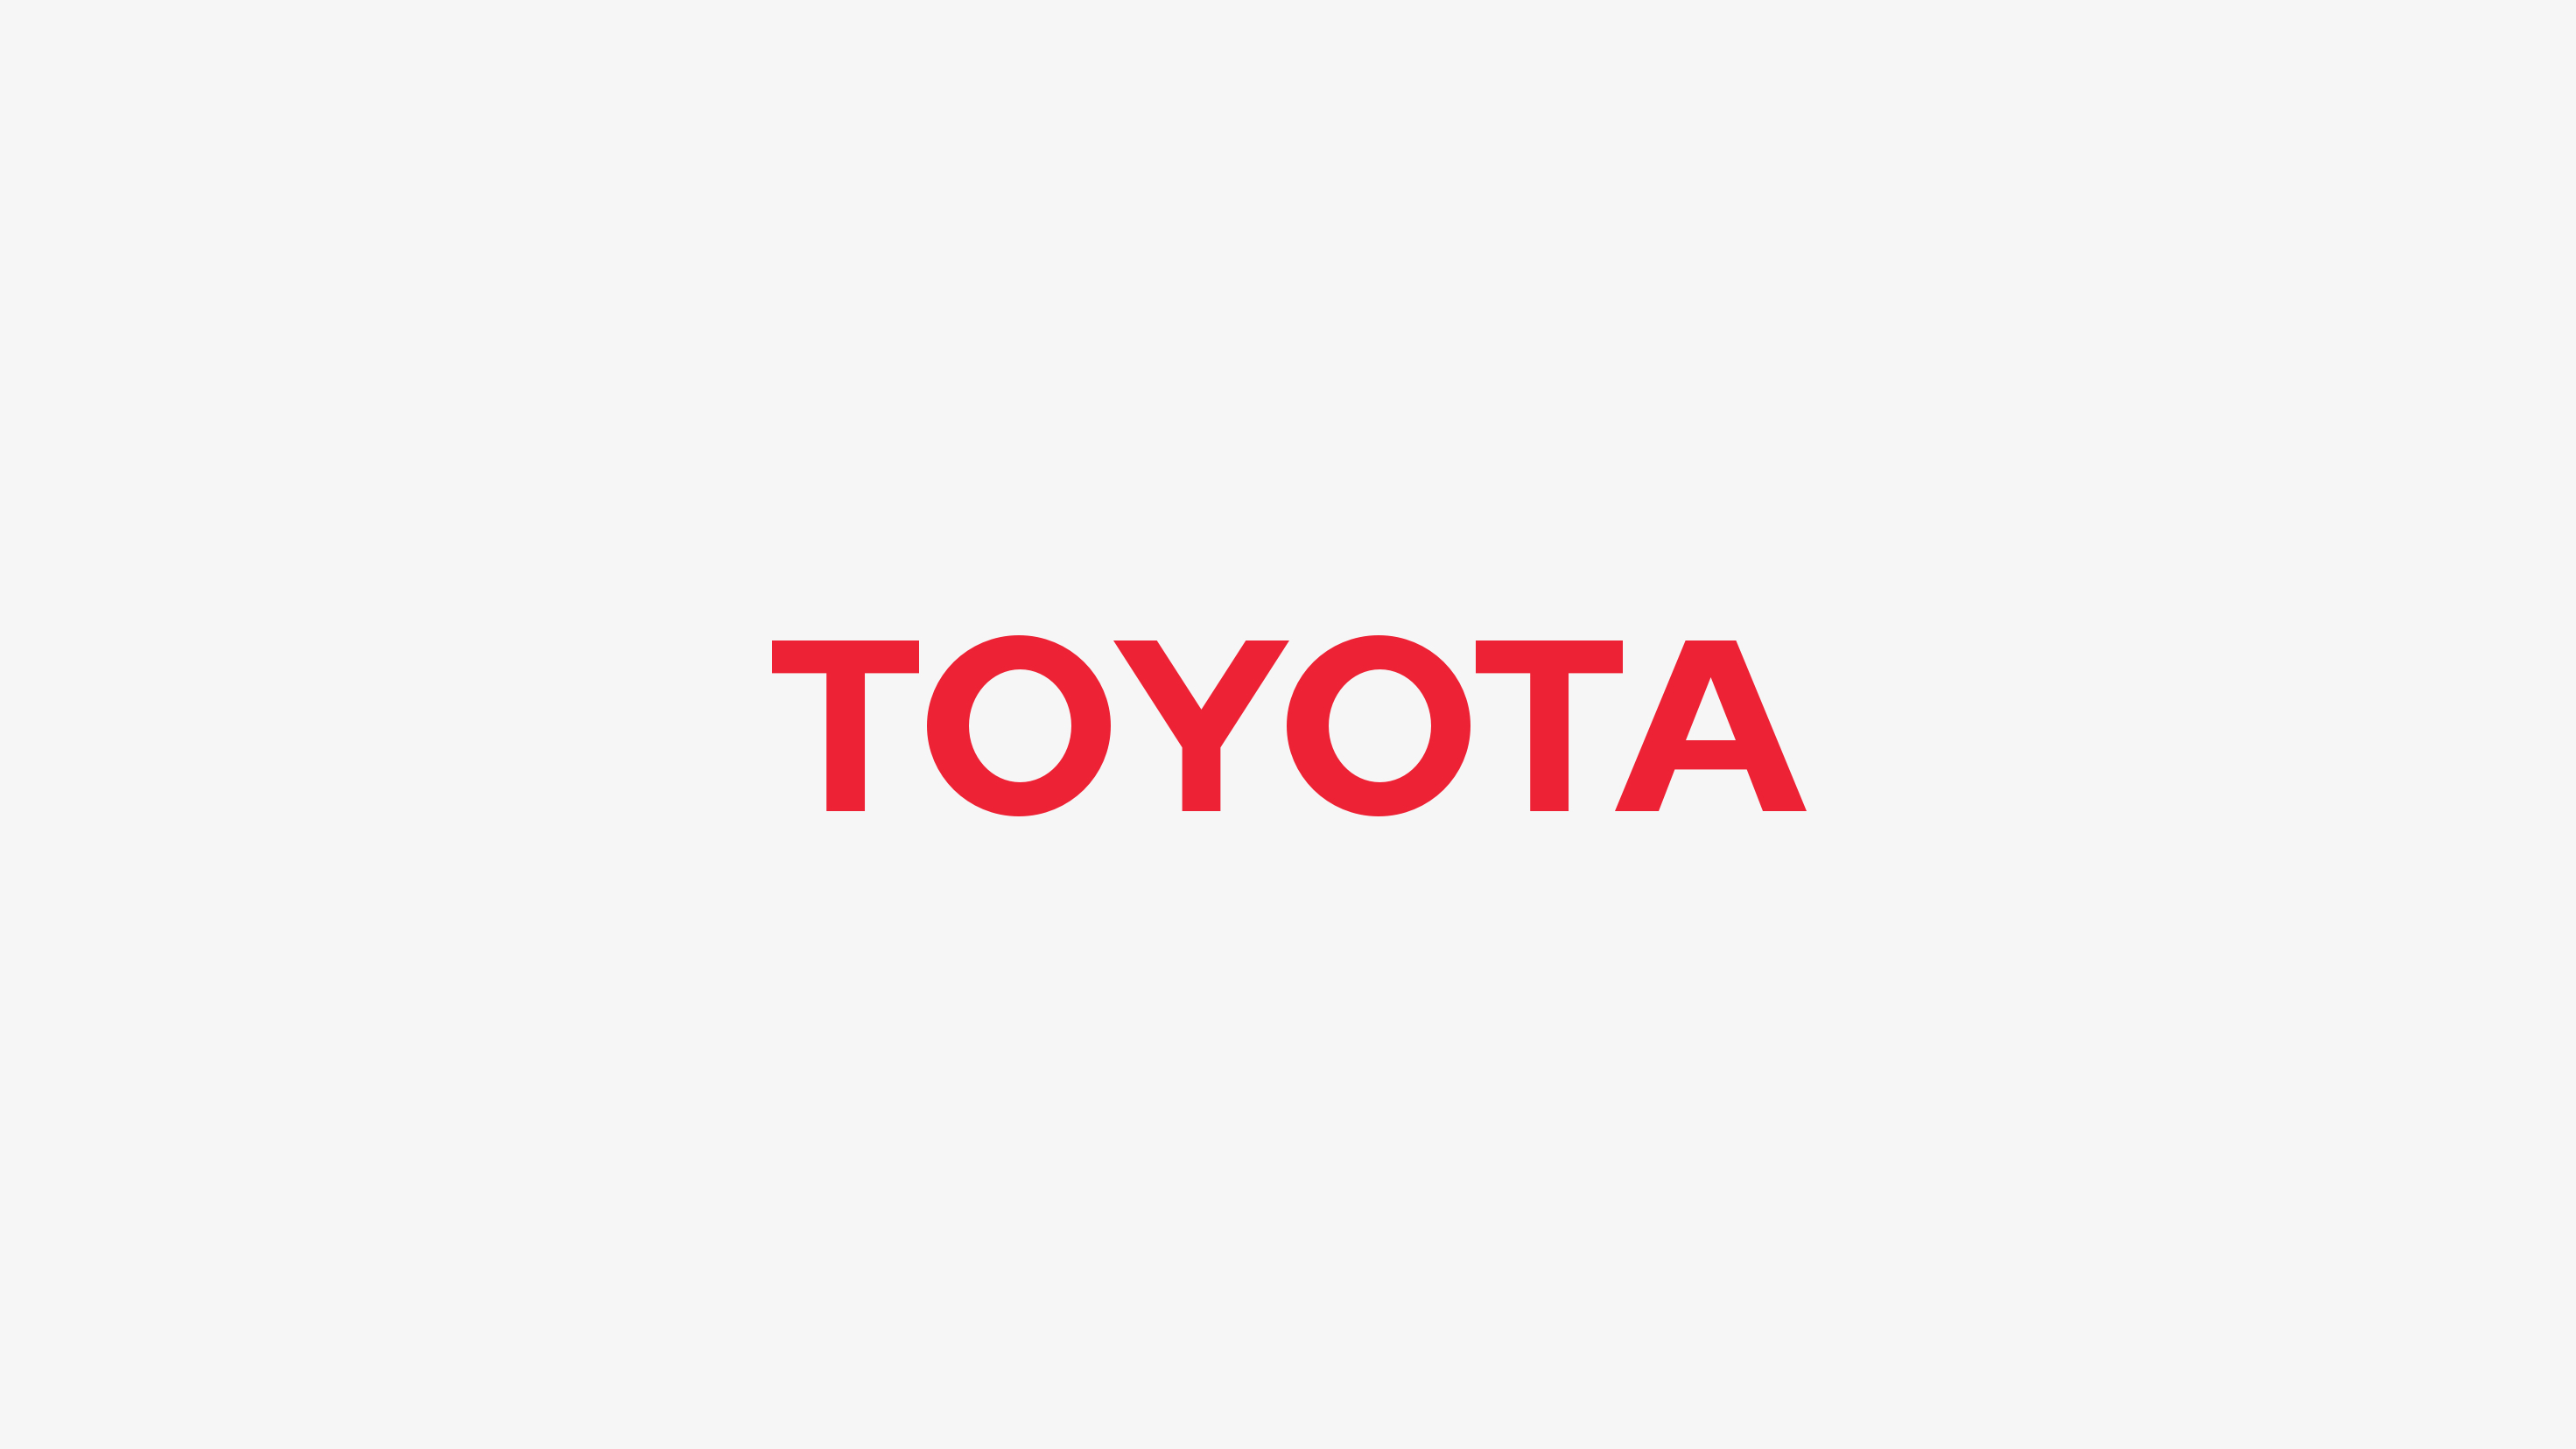 Buckle Up for Life: Toyota Partnership Continues to Promote Child Passenger Safety